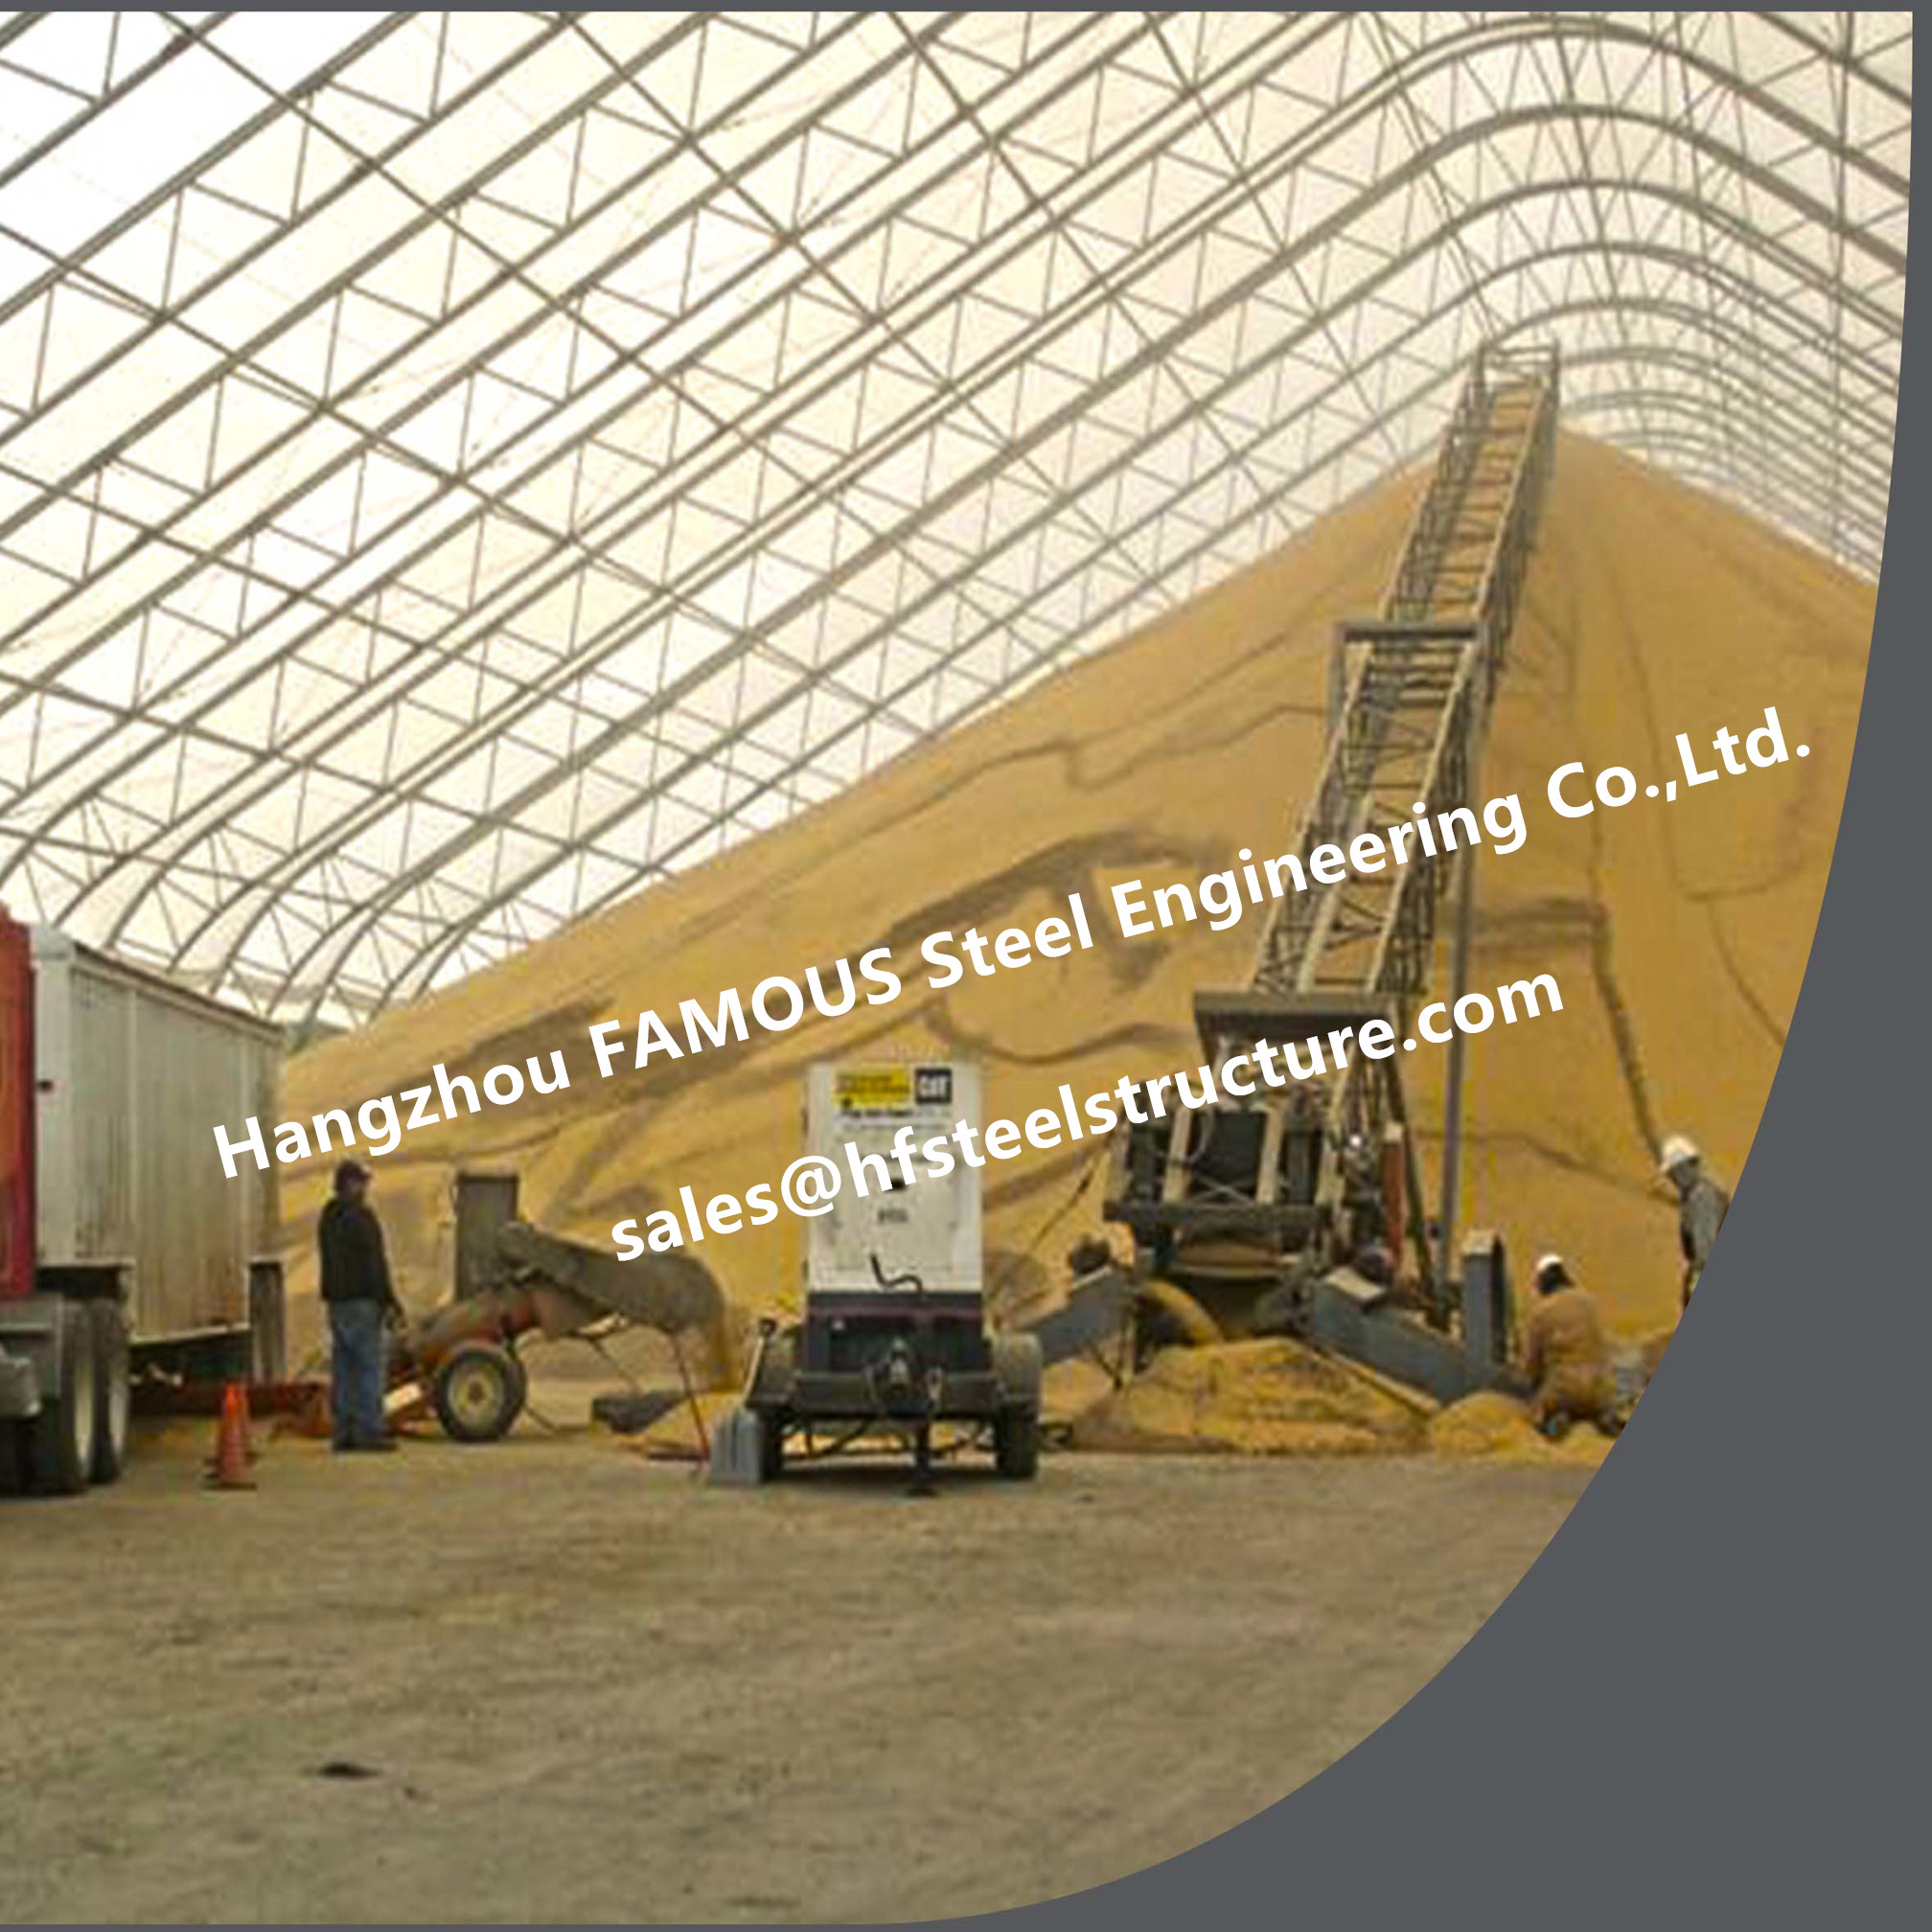 Corrugated Aluminum Space Framing - High Space Steel Framed Warehouse Buildings With Arch Roof For Barn Storage And Poultry Shed – FAMOUS